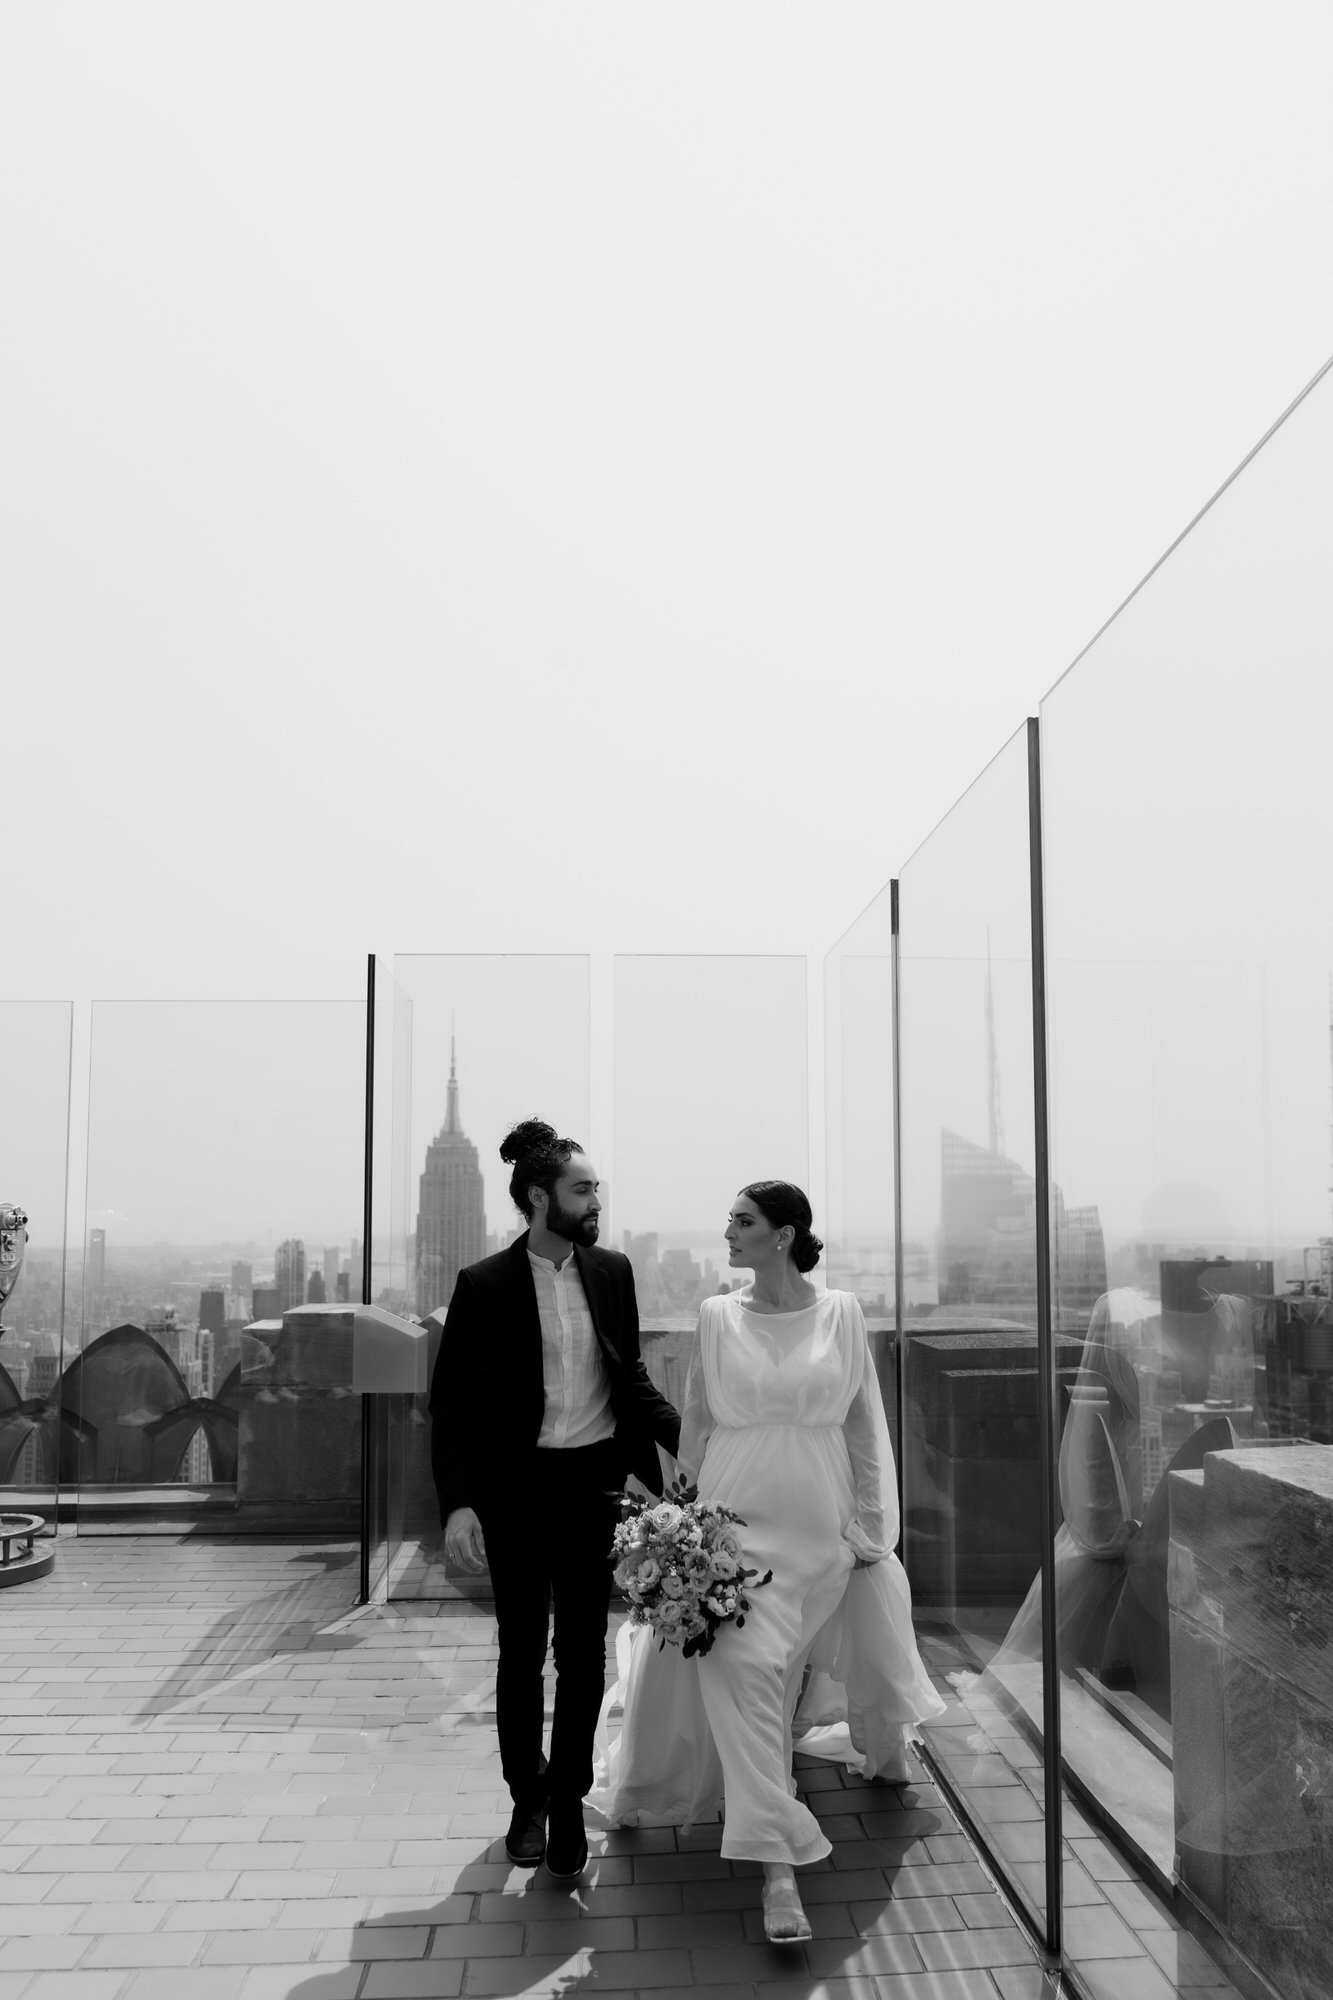 NYC-Top-of-The-Rock-Elopement-NYC-Photographer-Steph-Powell-Creative-21.jpg